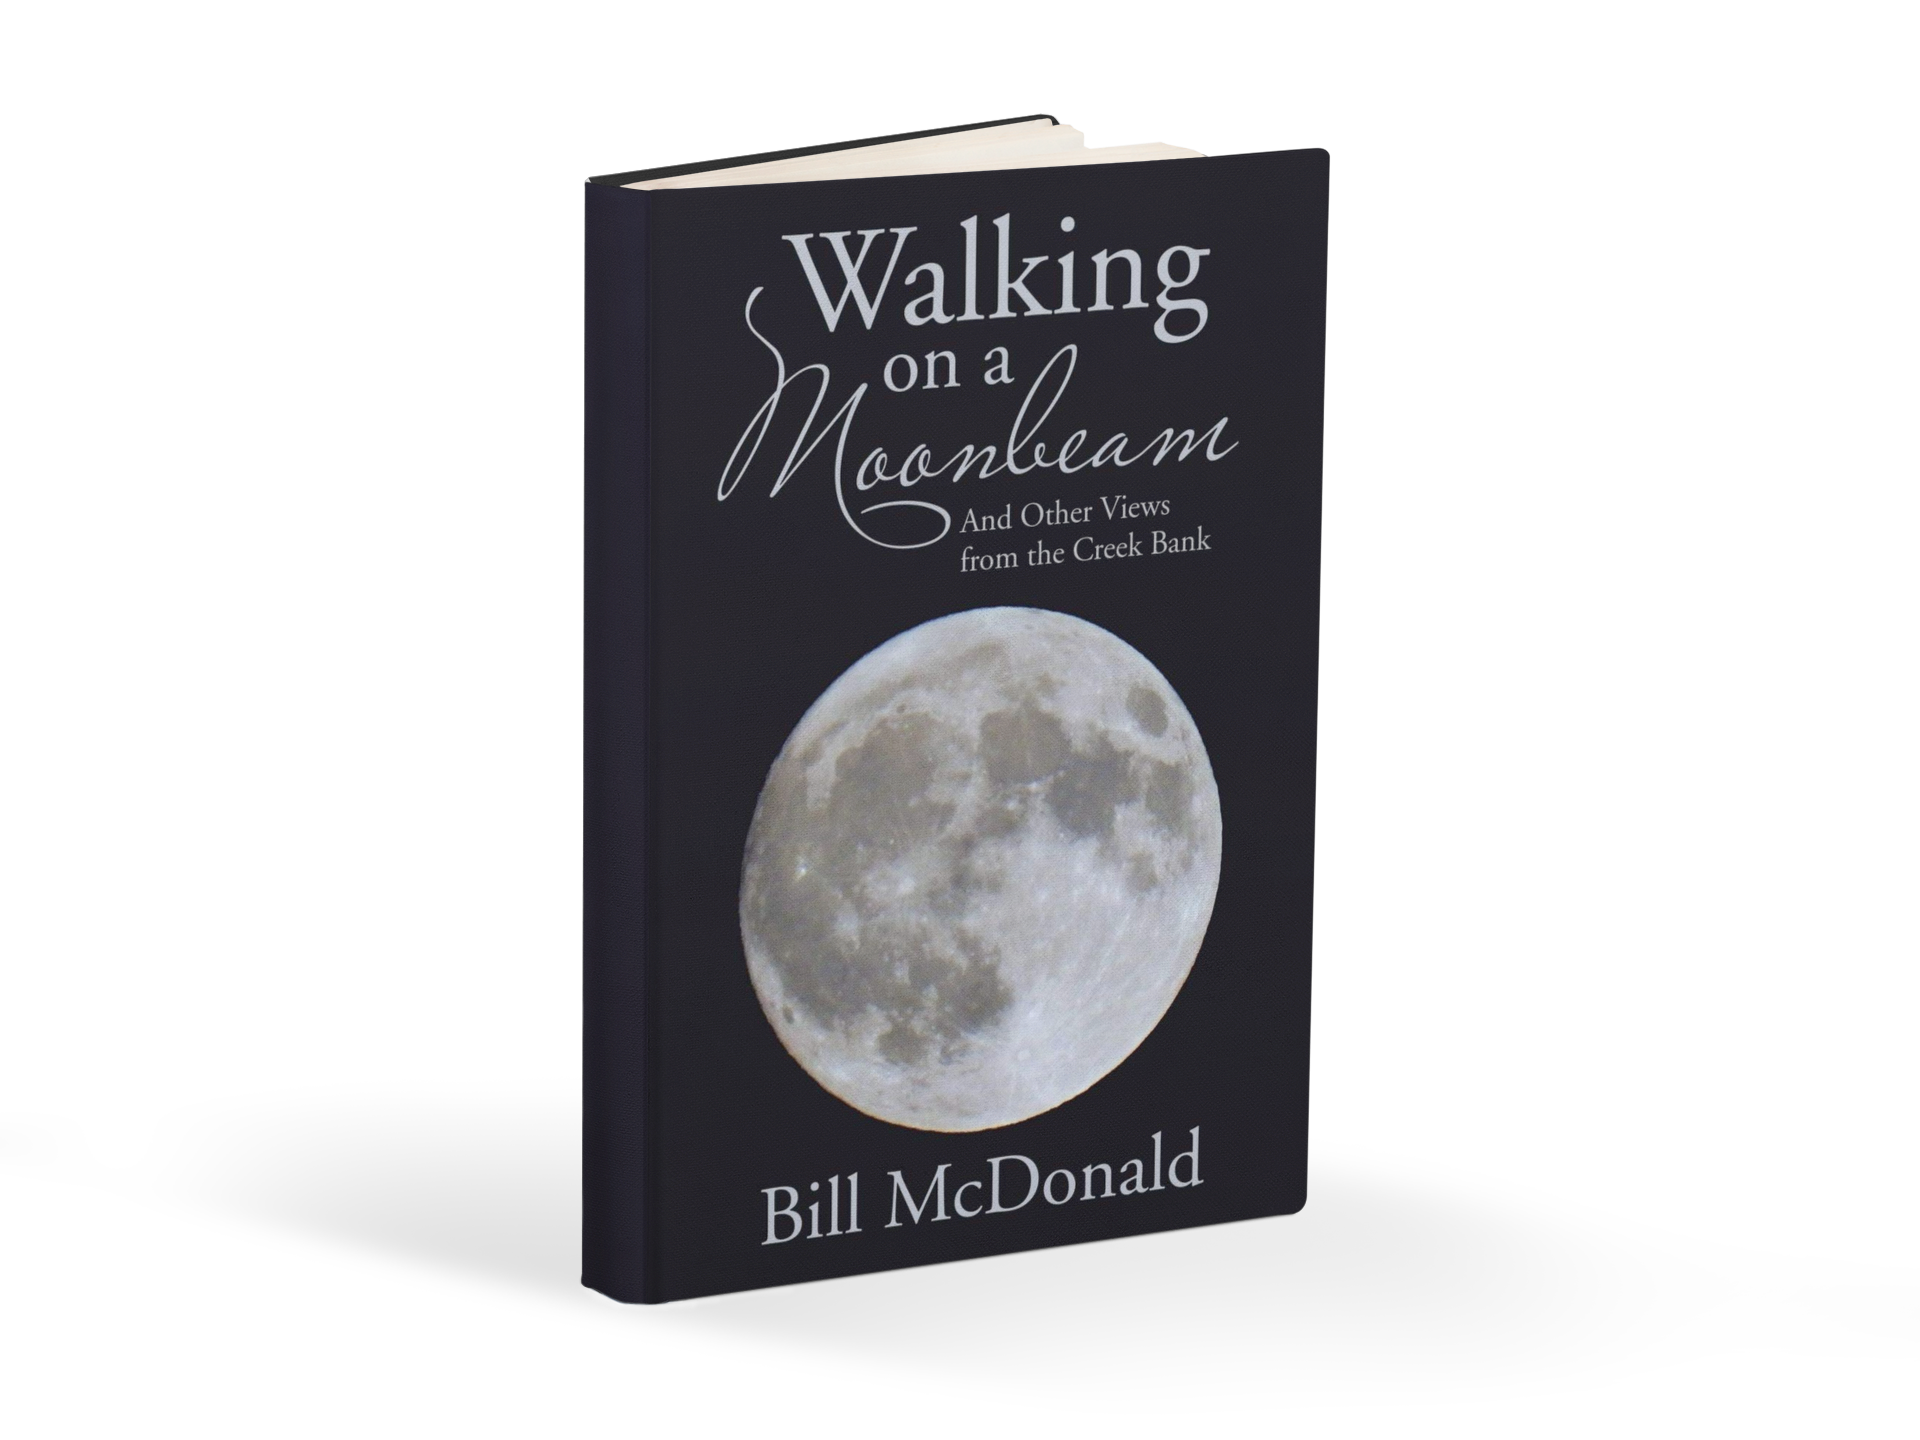 Bill McDonald’s Empowering Collection of Poetry, Walking on a Moonbeam, Offers Motivation To Follow One's Dreams